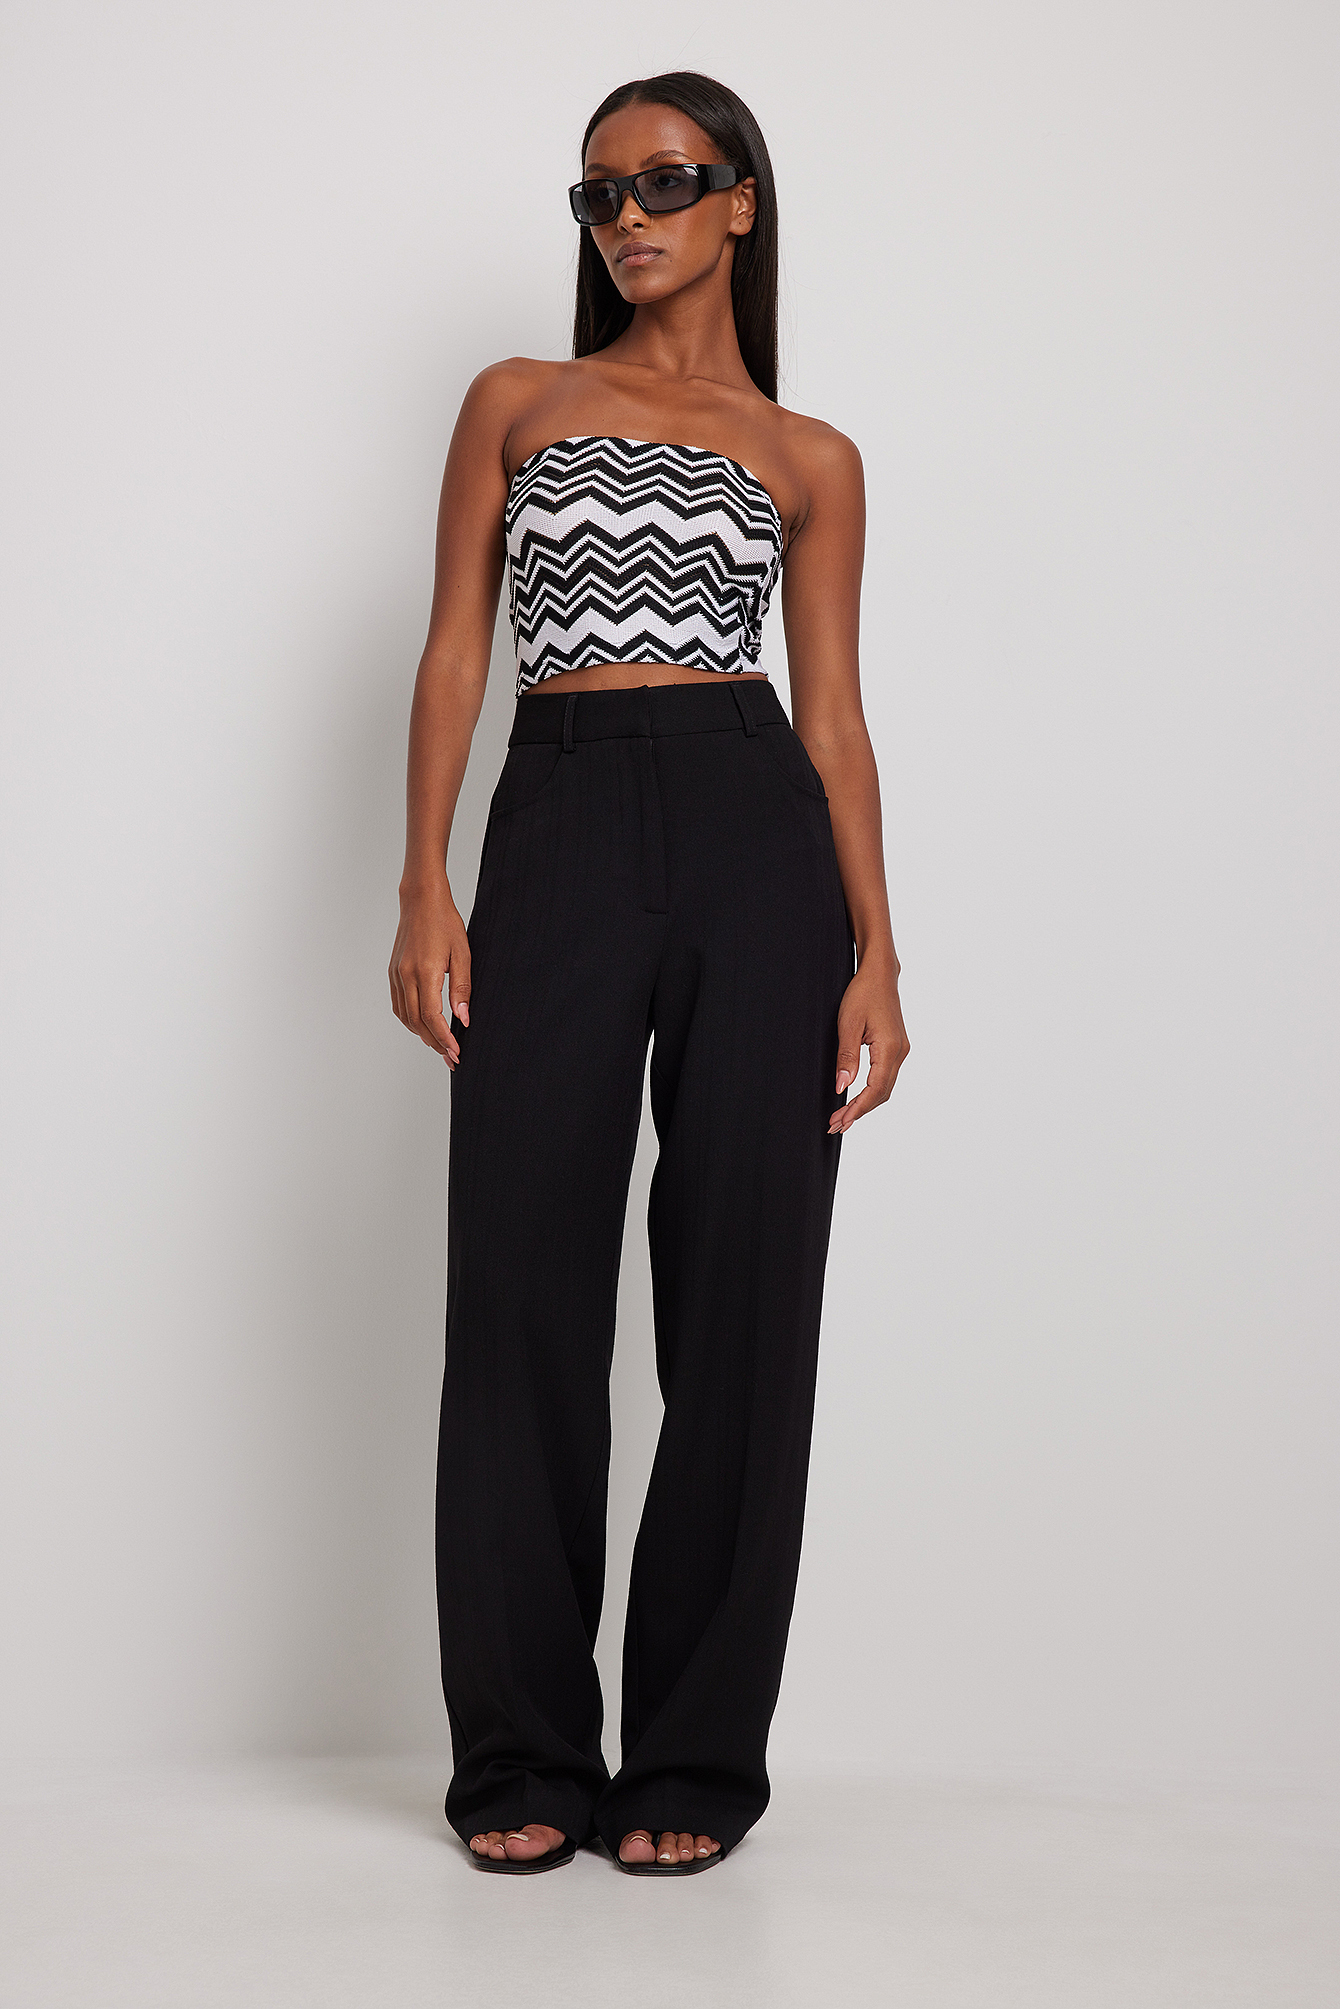 Zig Zag Patterned Bandeau Top Outfit